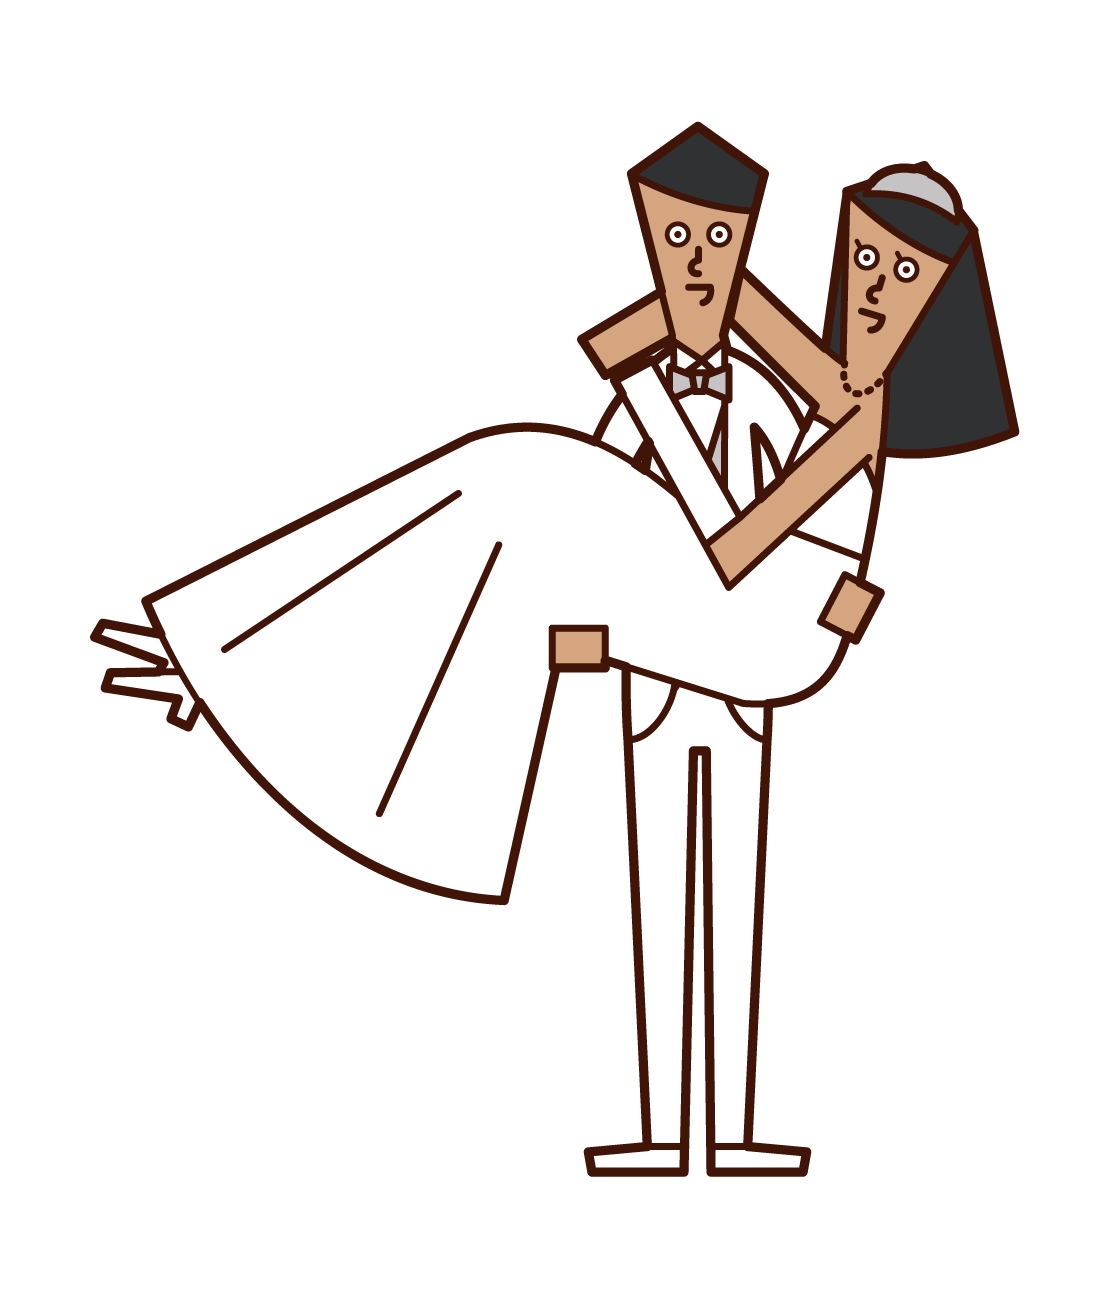 Illustration of groom holding a bride as a princess